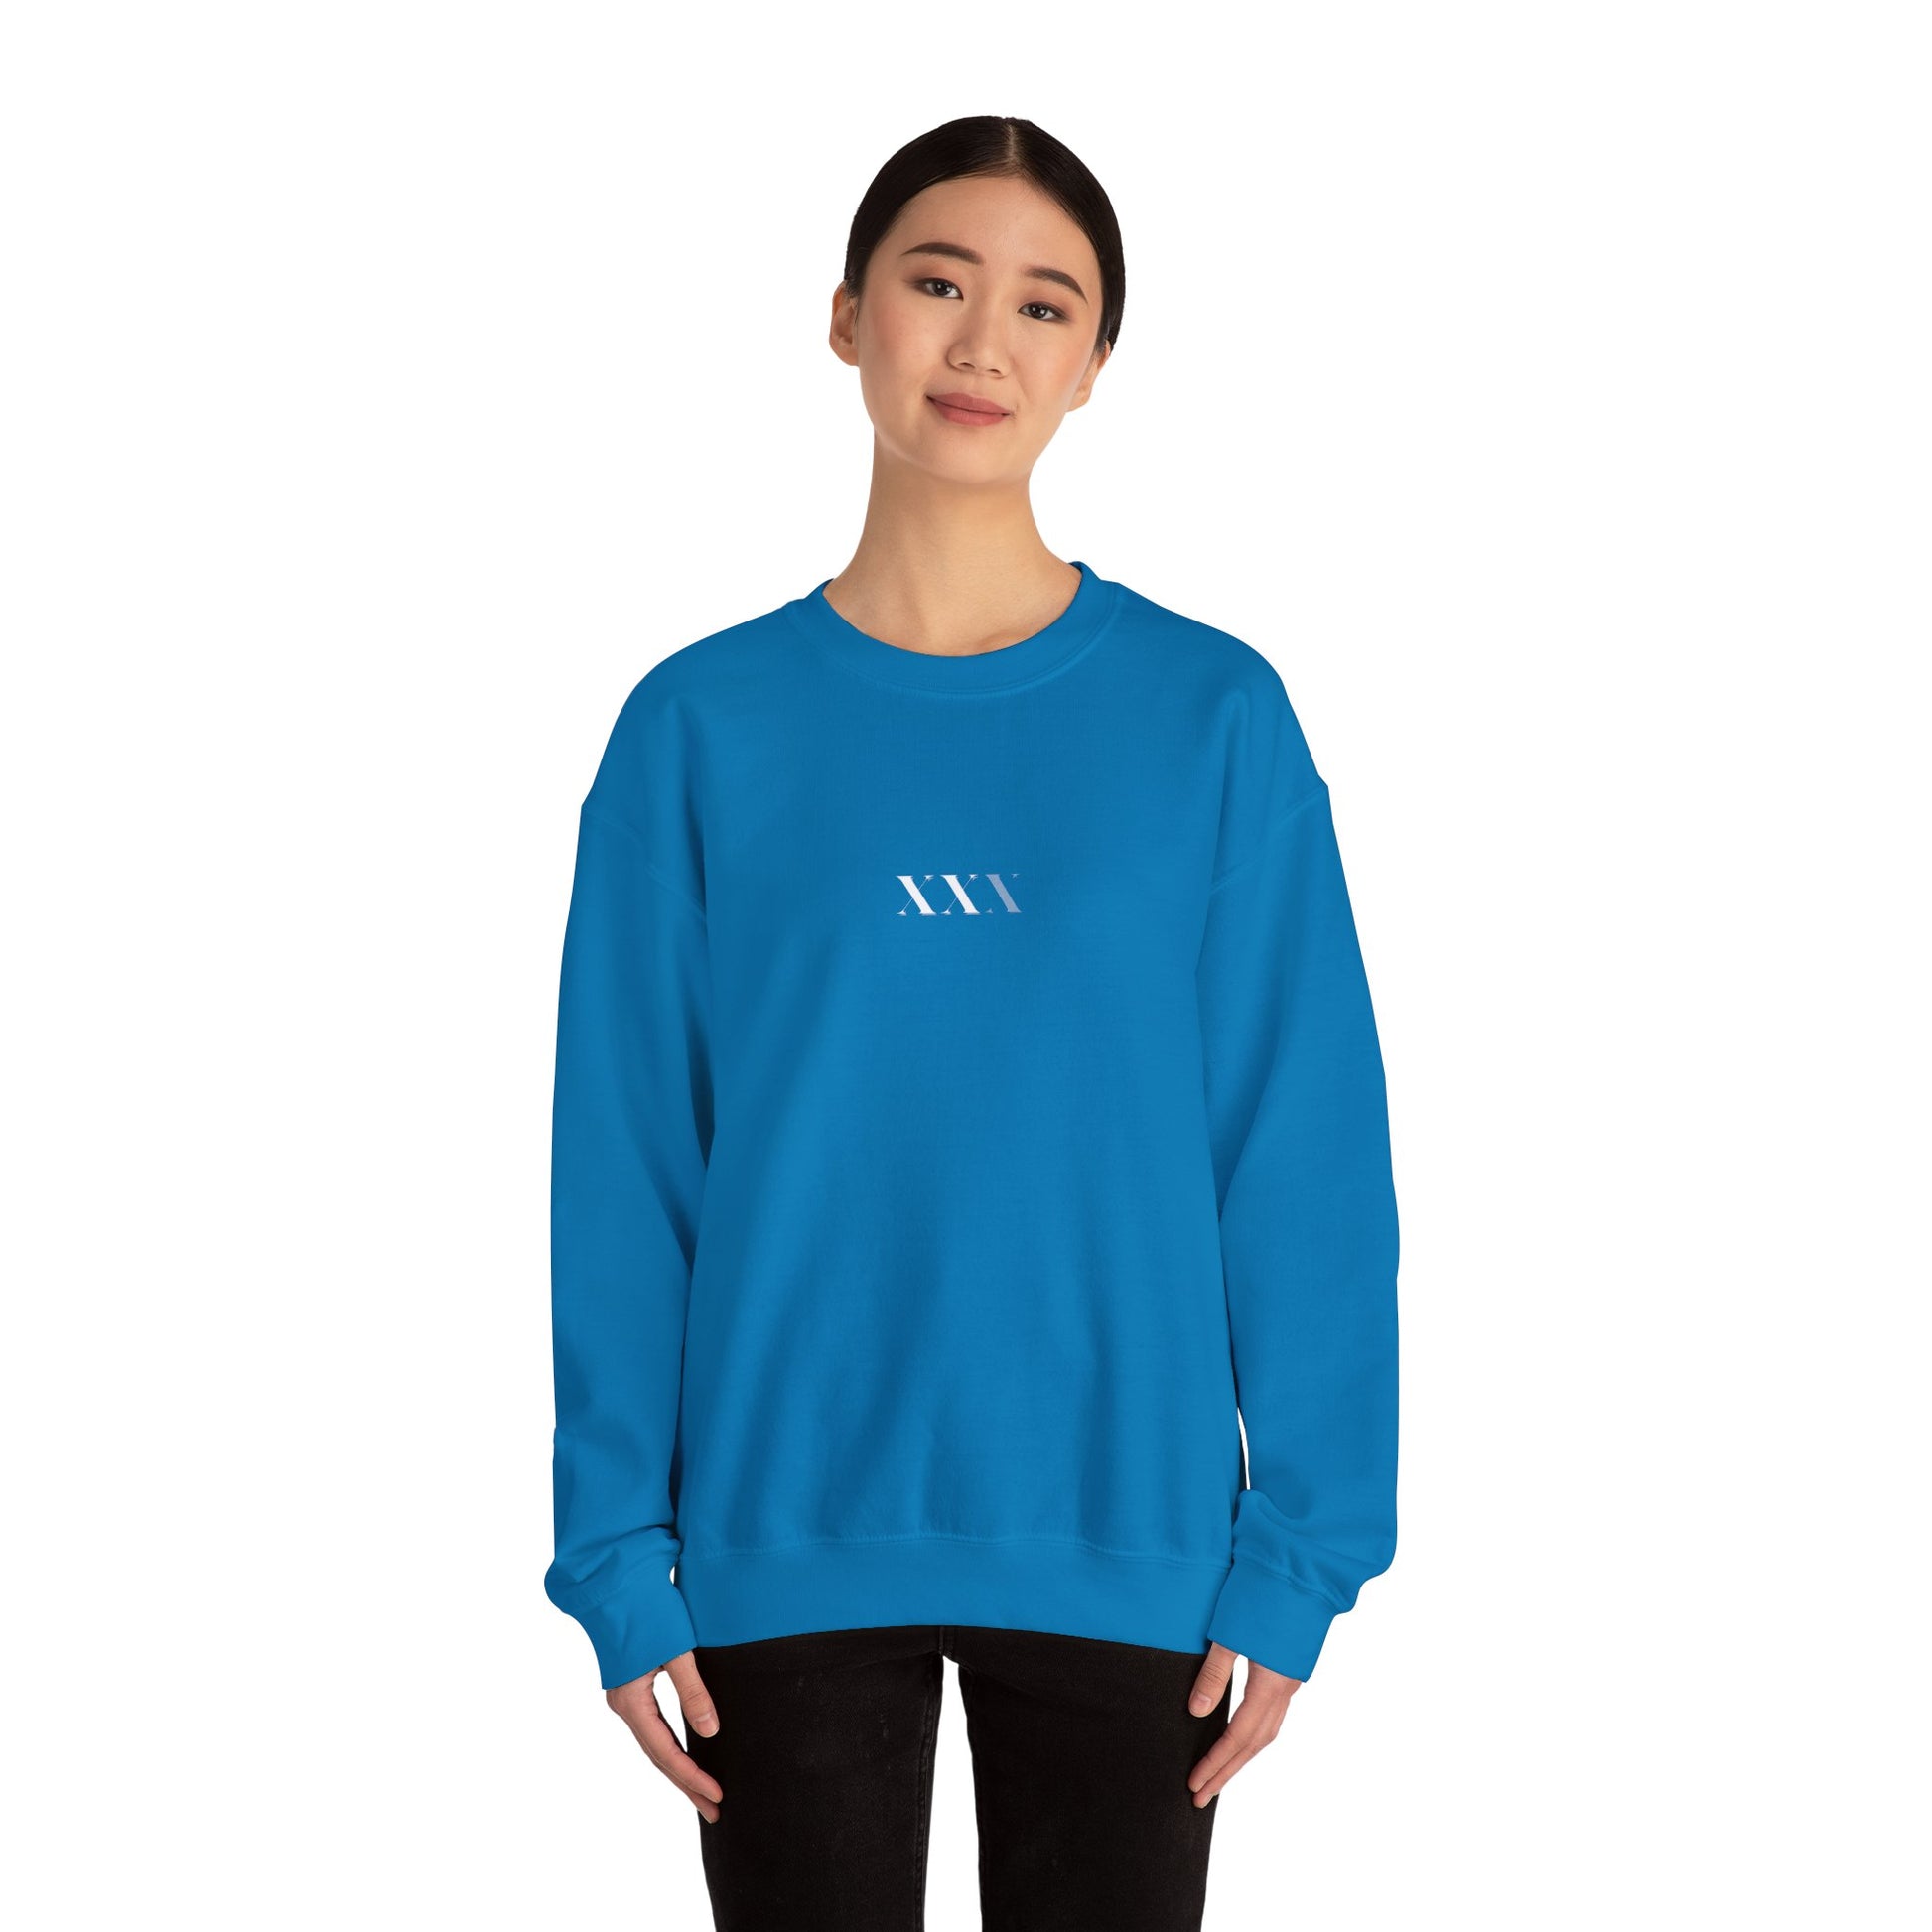 Only Tans Crewneck - The Beach Bae